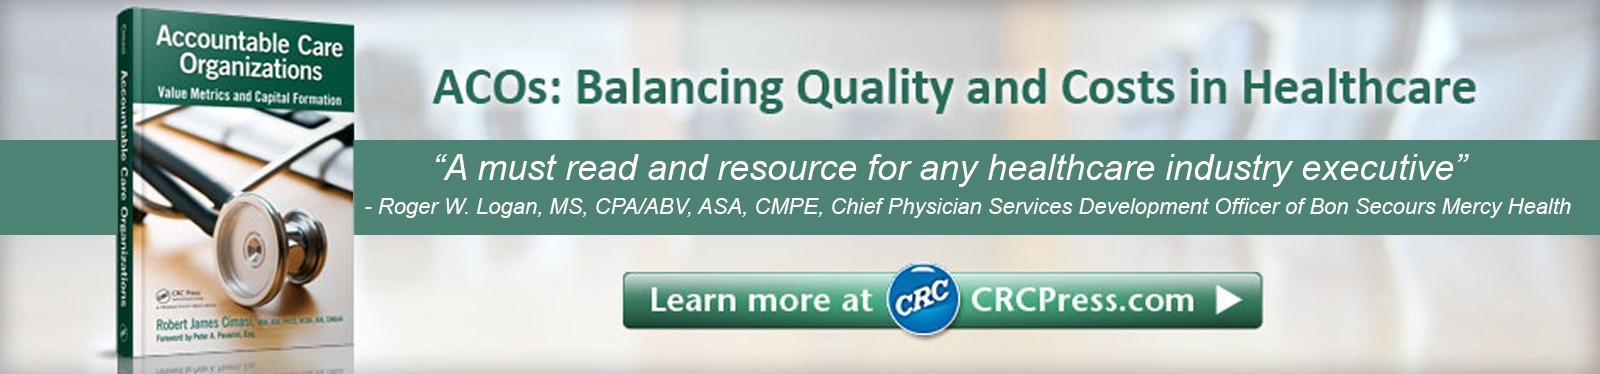 Accountable Care Organizations Banner